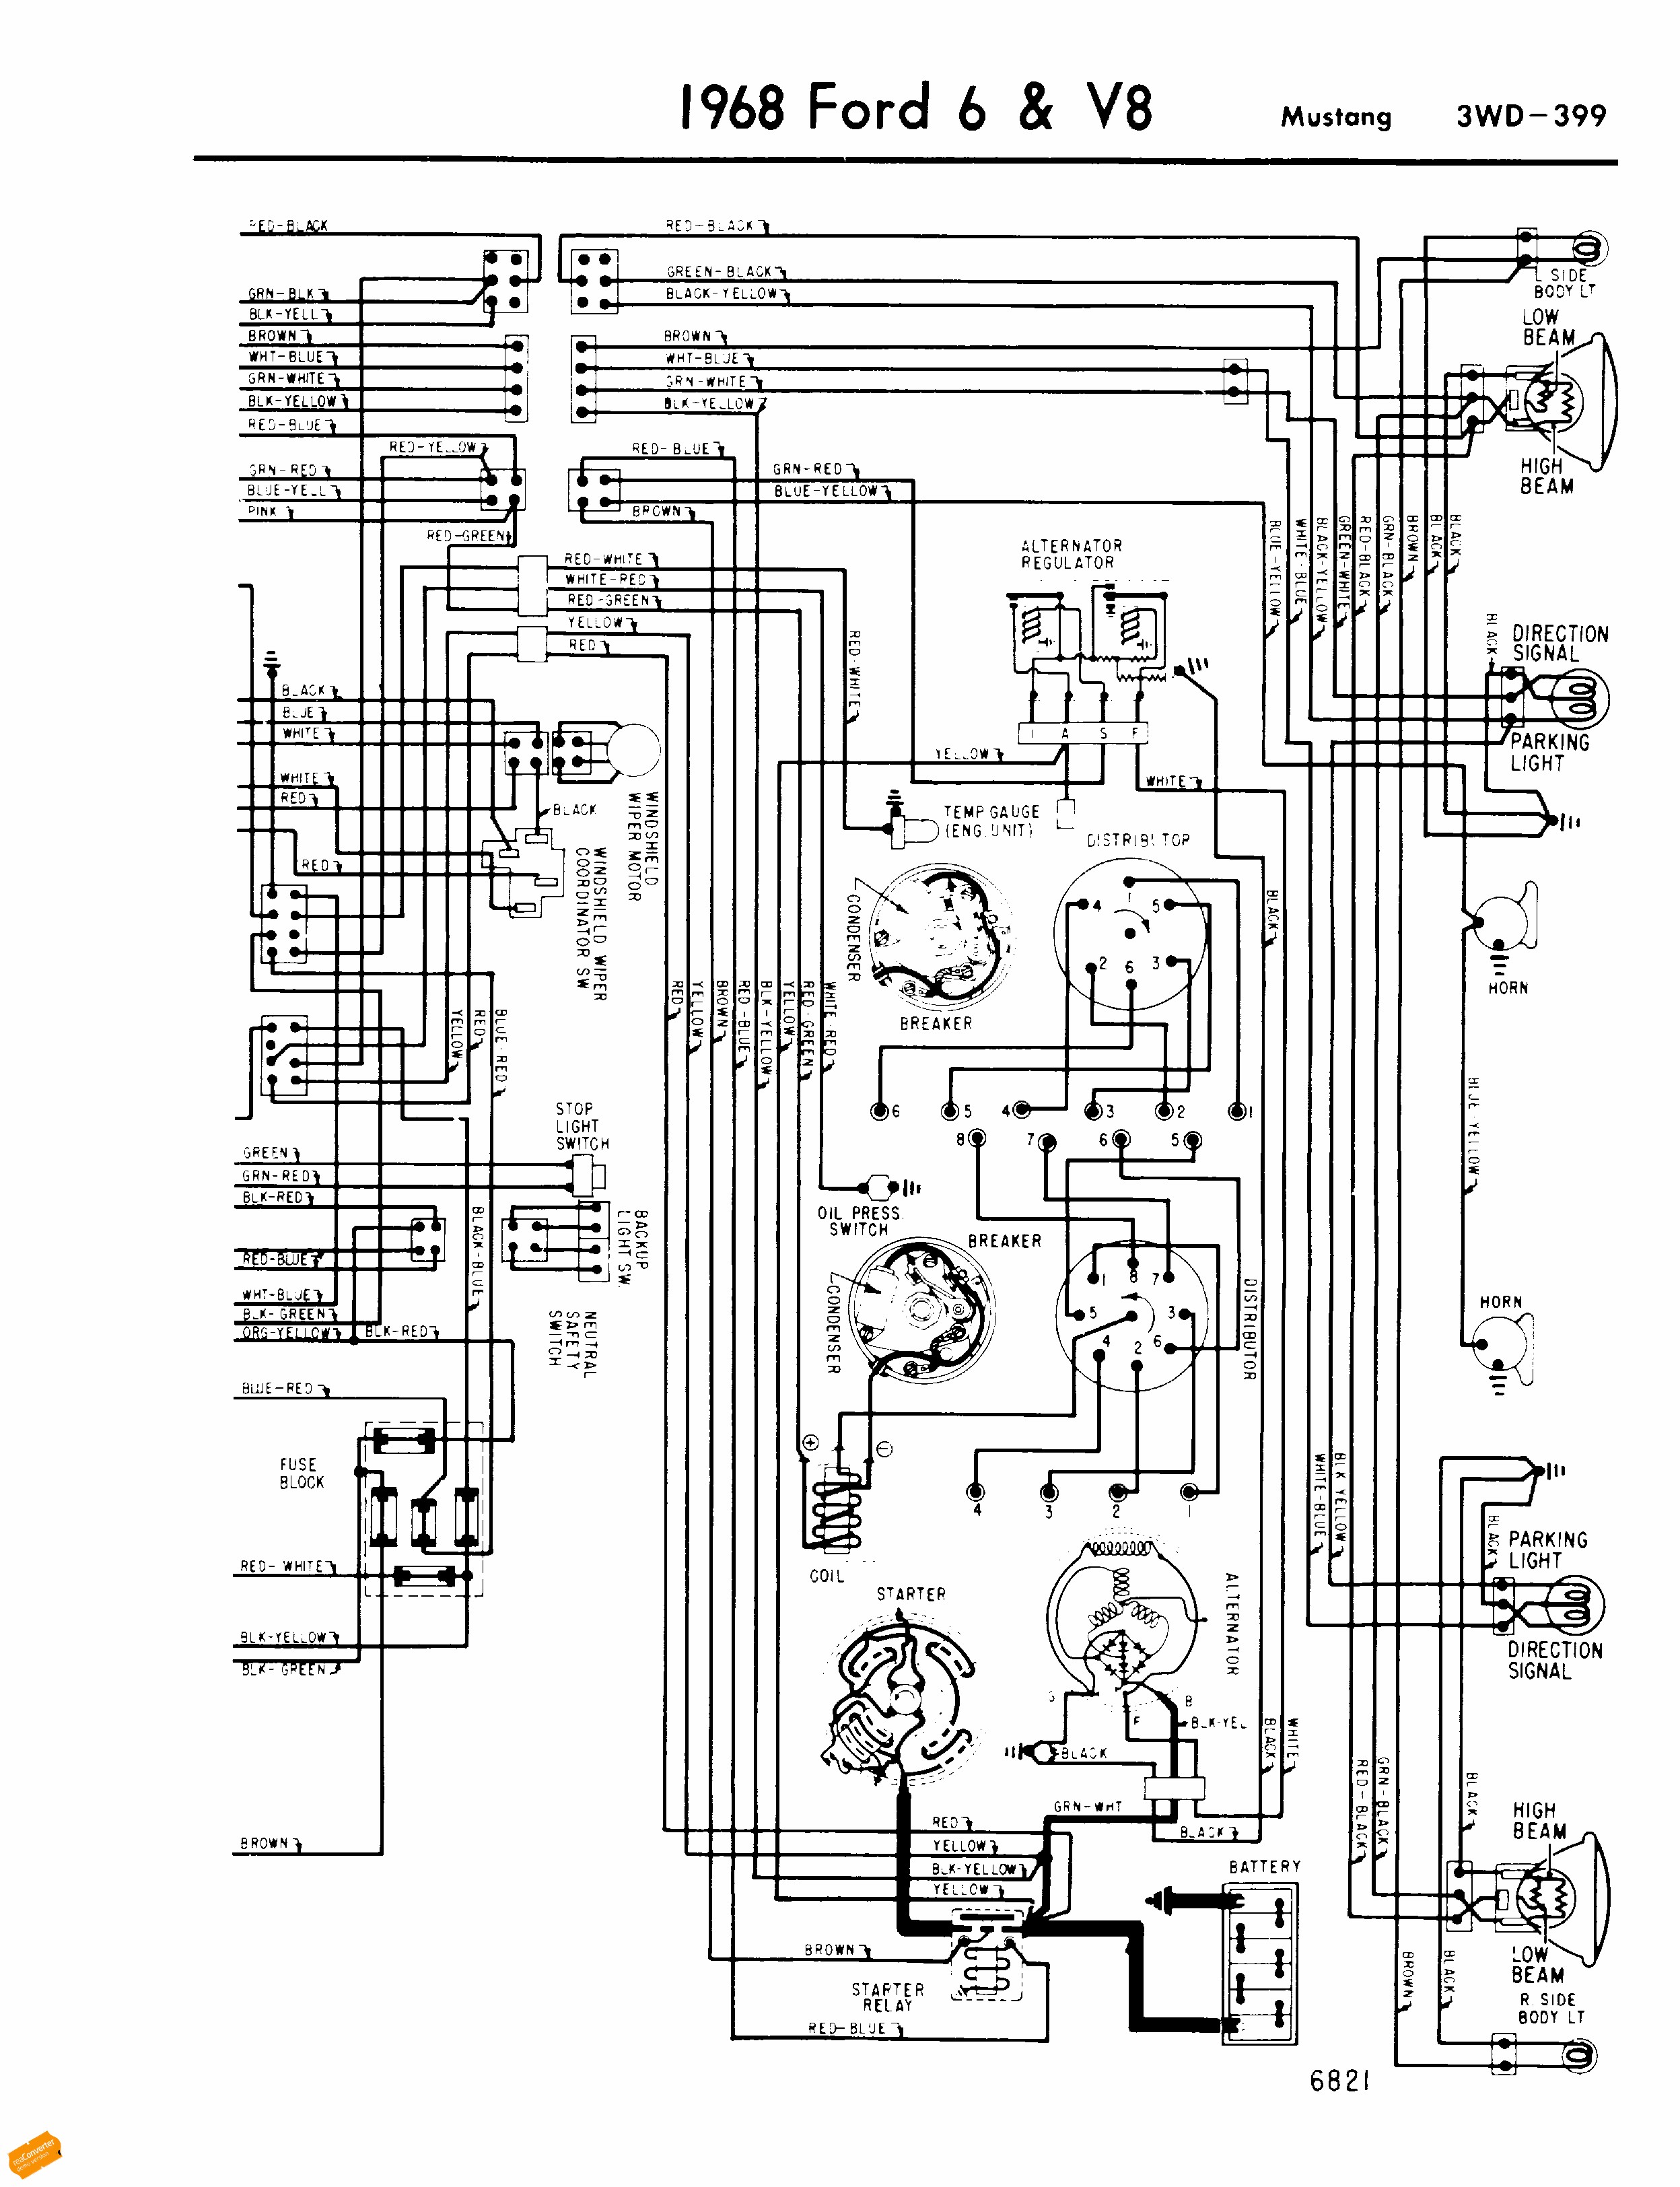 1968 Mustang Engine Wiring Diagram Wiring Diagram Best Sample 1968 Mustang Schematic Endear ford Of 1968 Mustang Engine Wiring Diagram